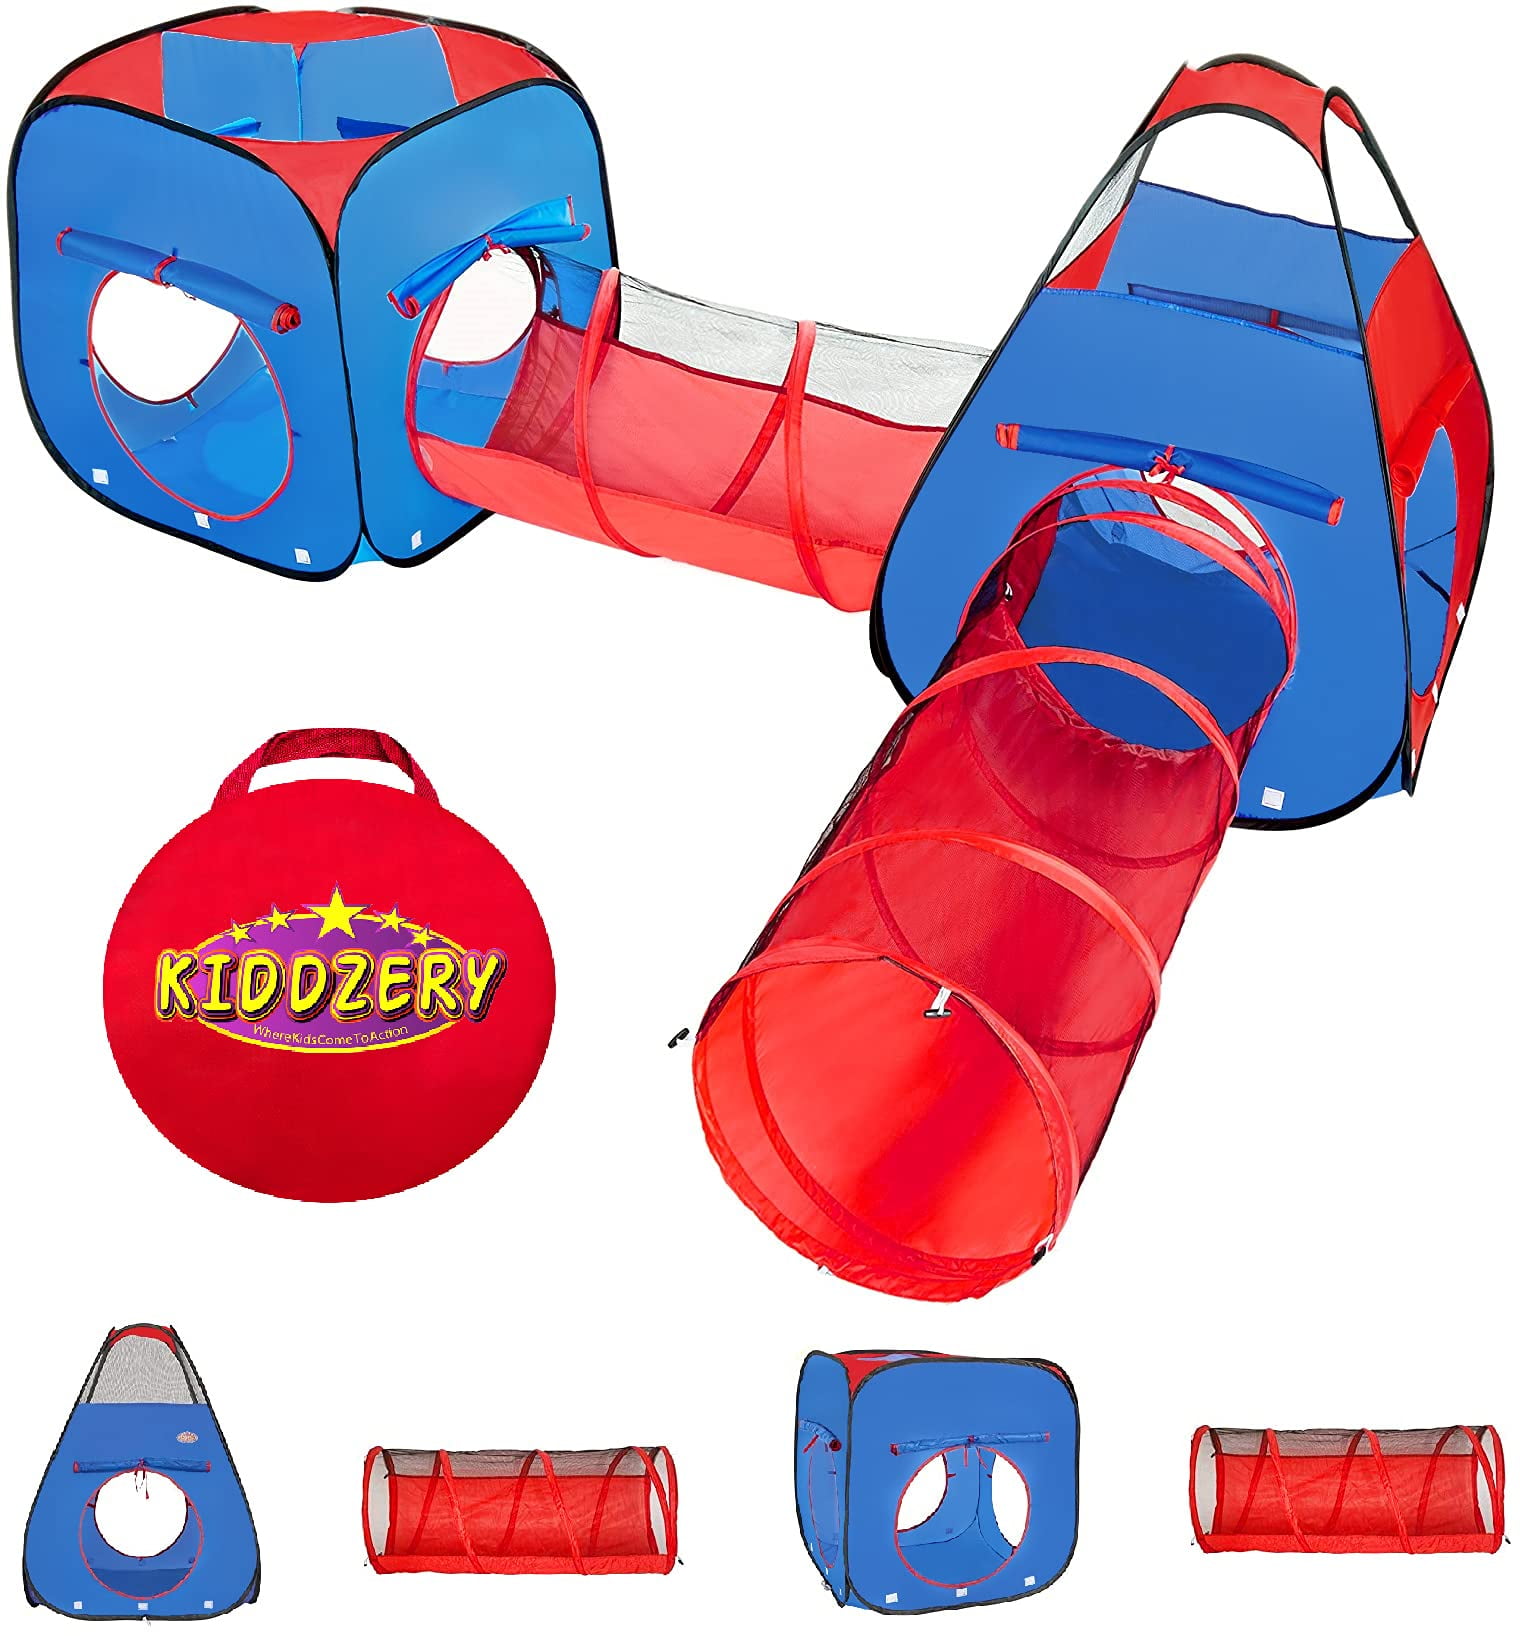 Pop Up Kids Tunnel 4 Way Crawl Through Tent 8 Feet Carry Case Hours of Fun 